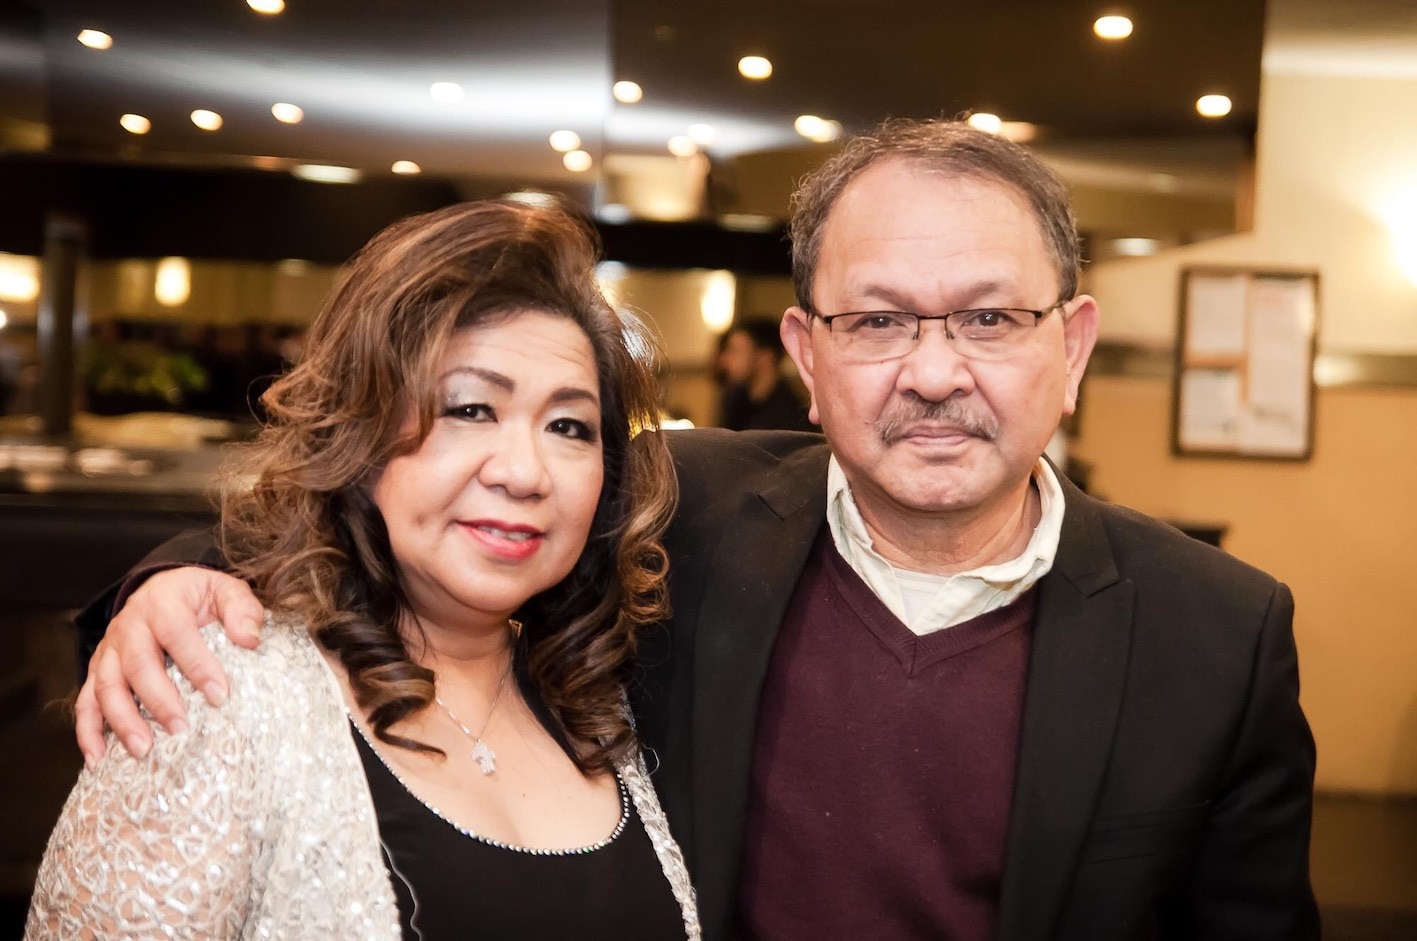 Mr and Mrs Abadilla have been migrants in Australia for more than 30 years now.